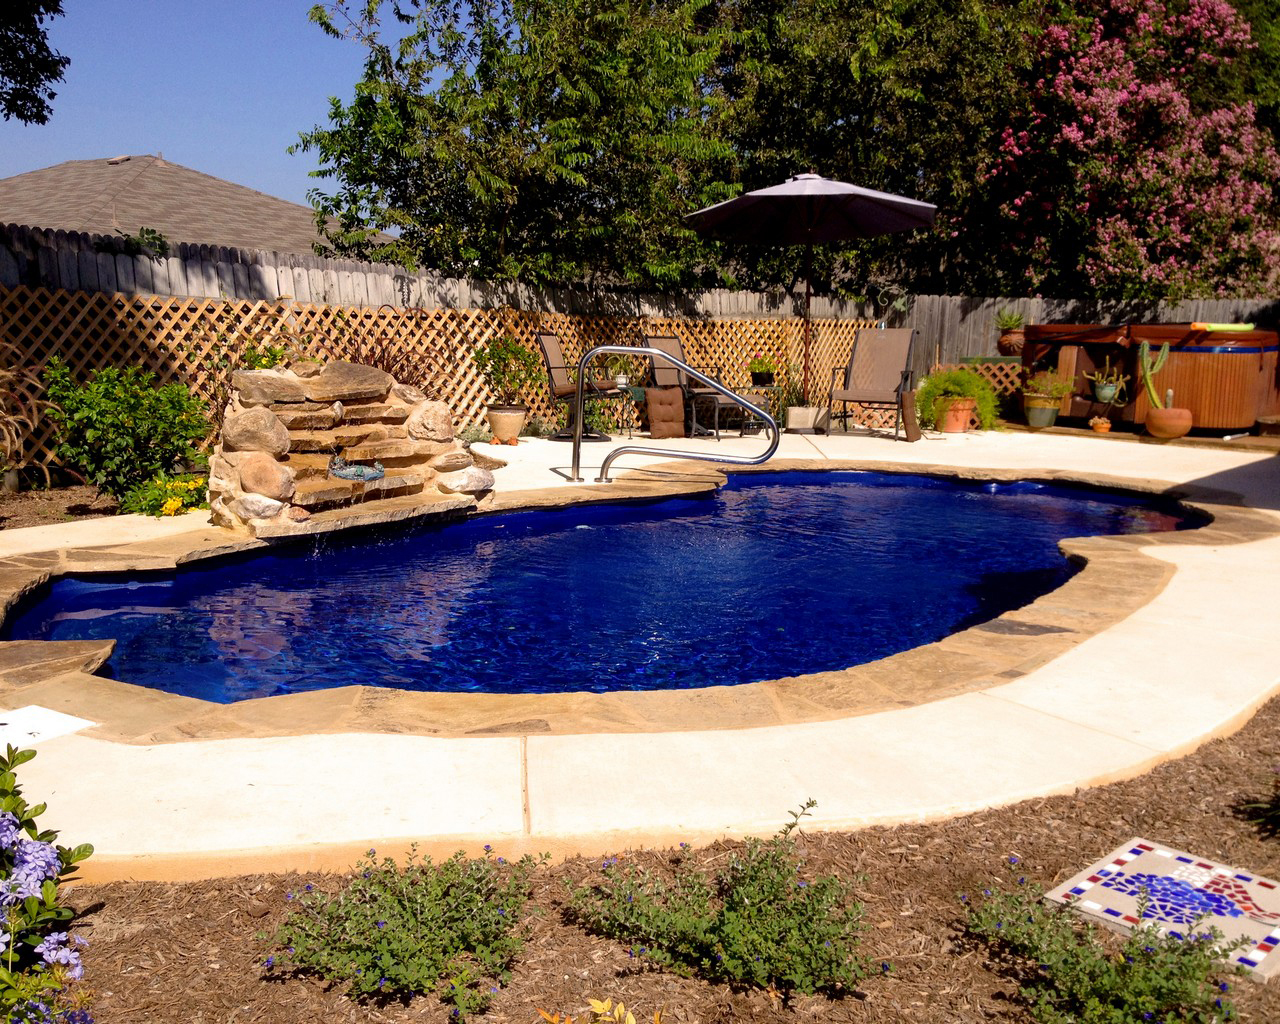 Lonestar Inground Fiberglass Pools Floresville Tx, your manufacturer for completing your private backyard Oasis staycation vacation dream